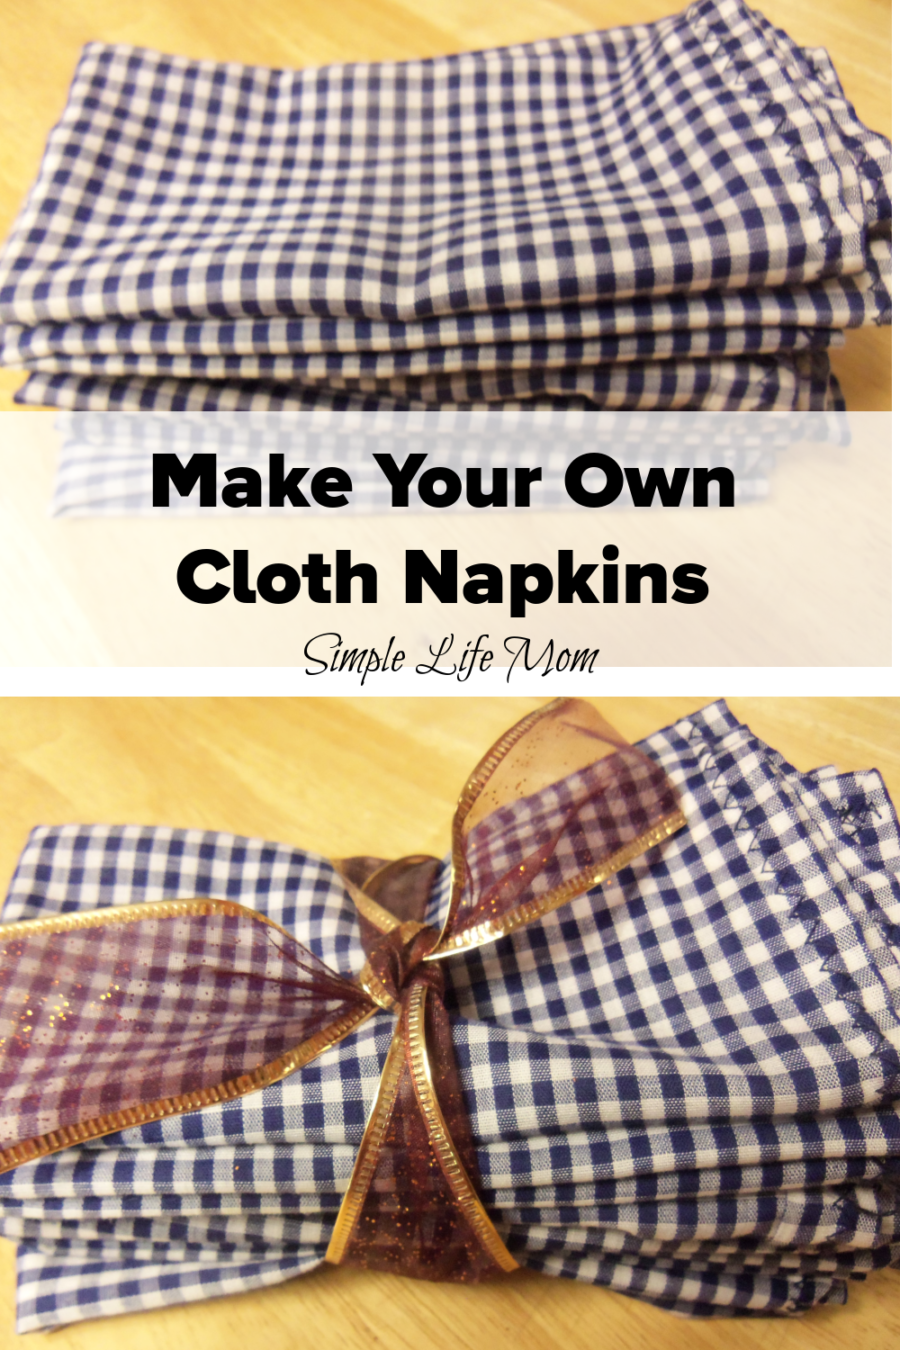 Make Your Own Cloth Napkins from Simple Life Mom